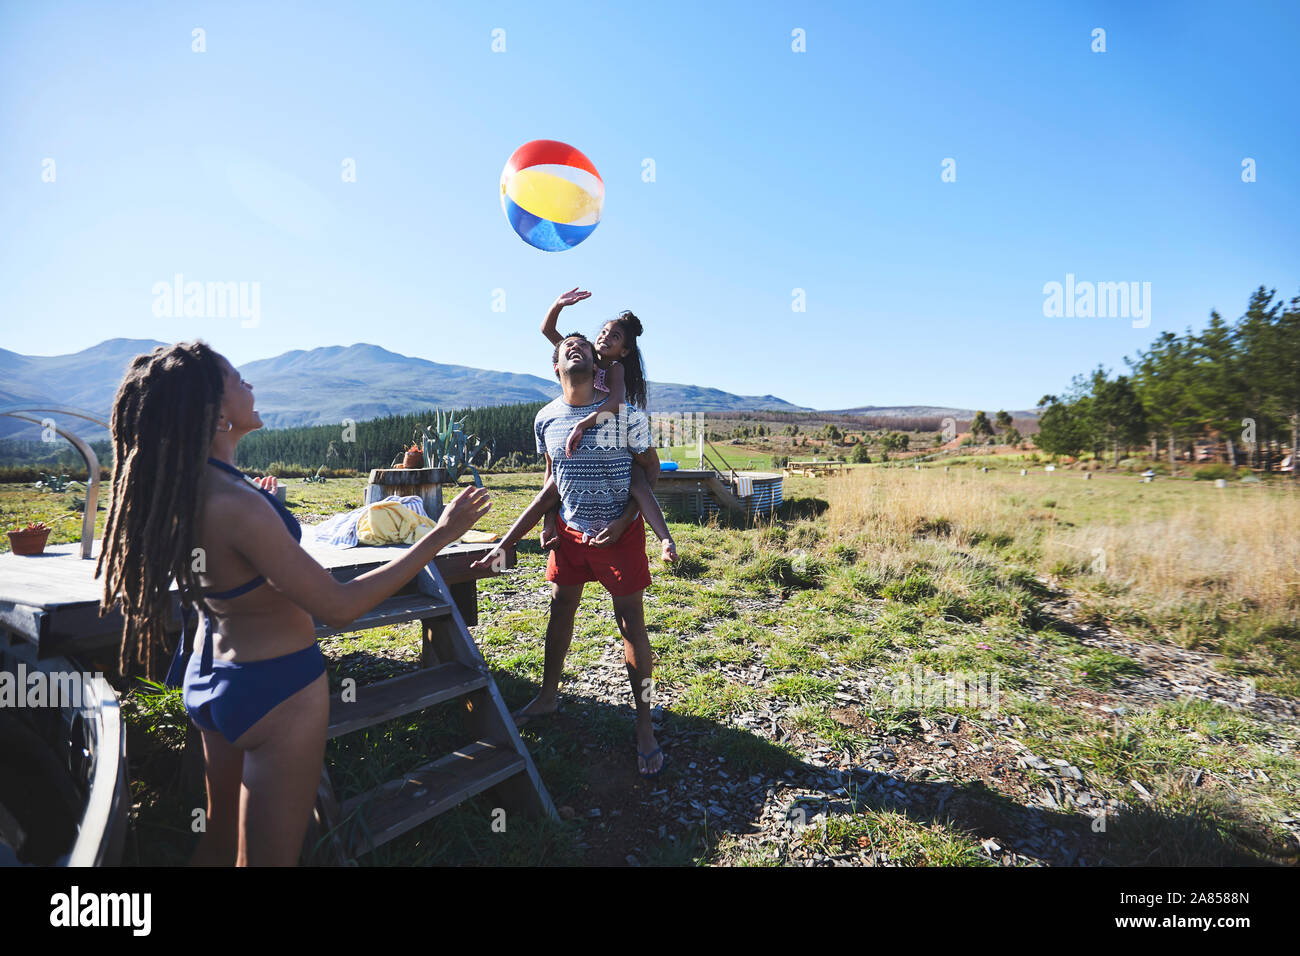 Happy, playful family with beach ball in sunny, summer field Stock Photo